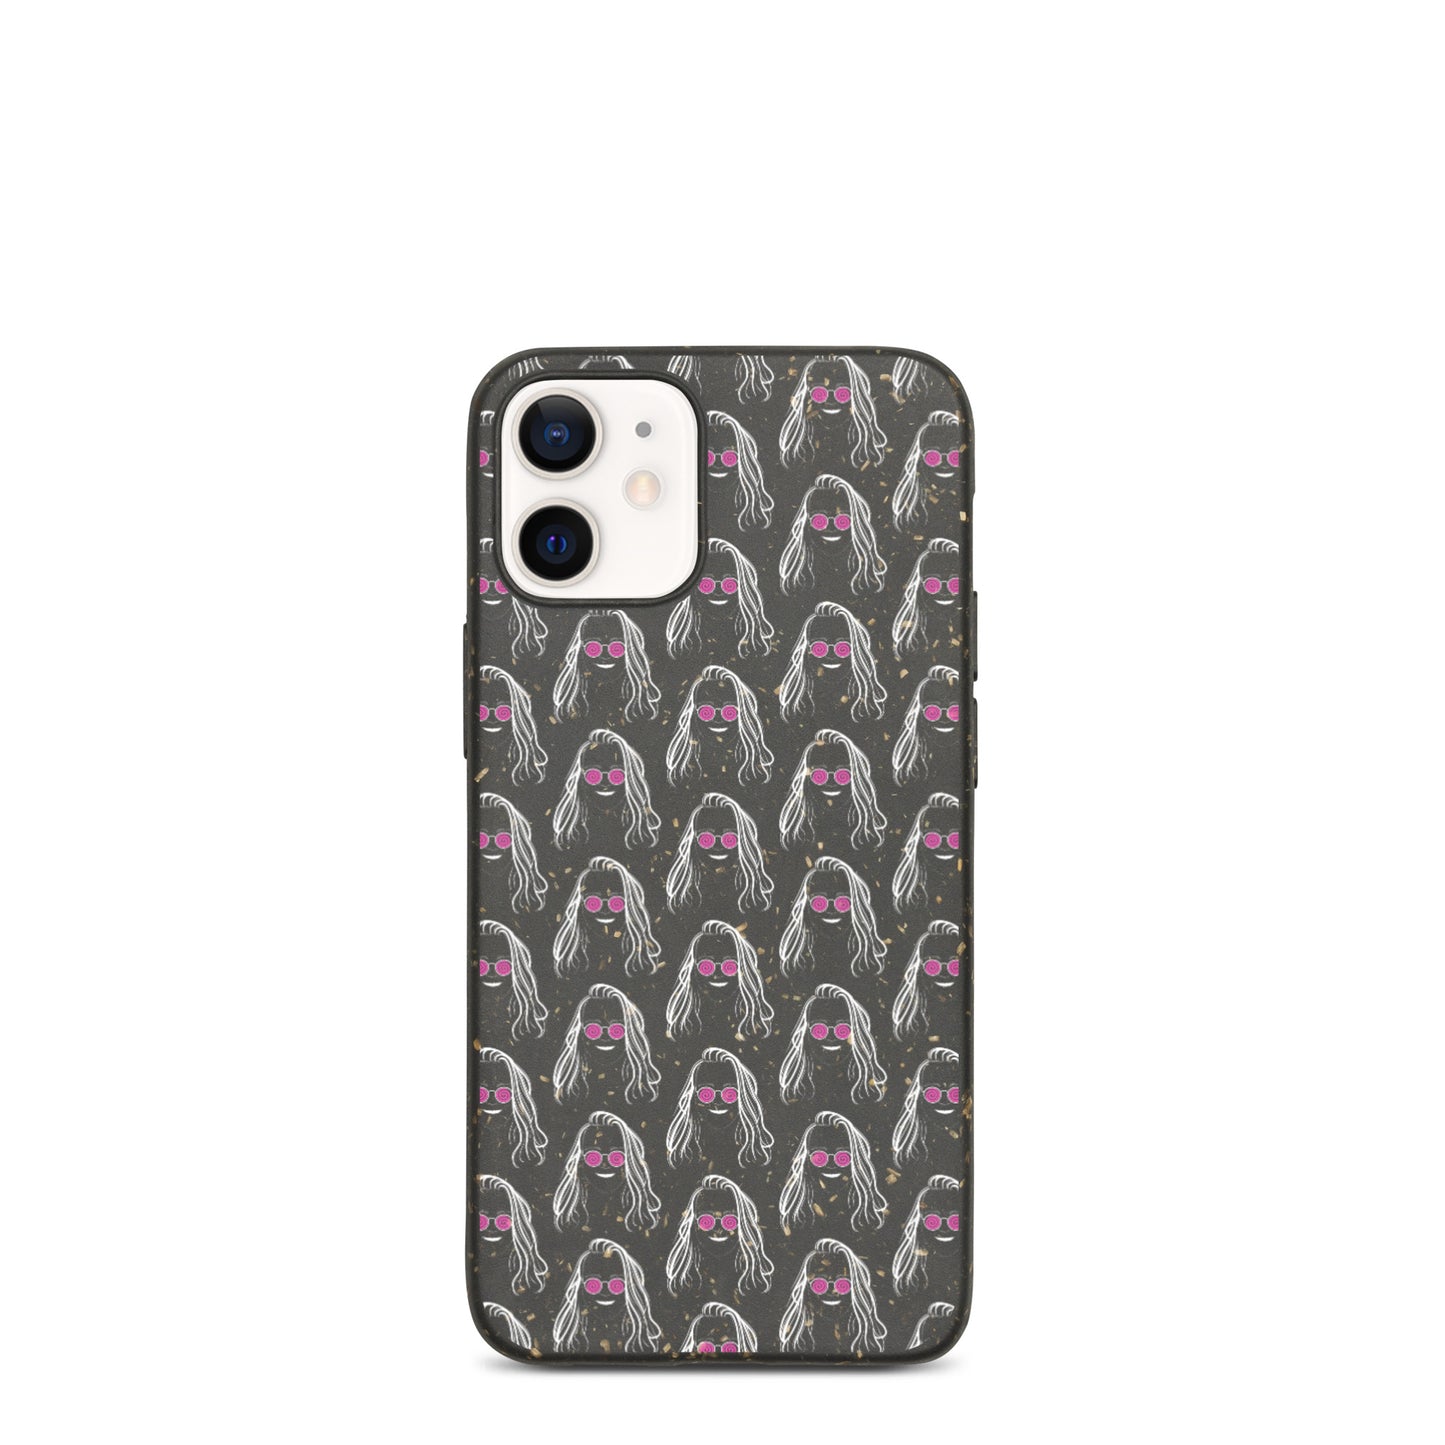 "HypnotEyes" Speckled iPhone case